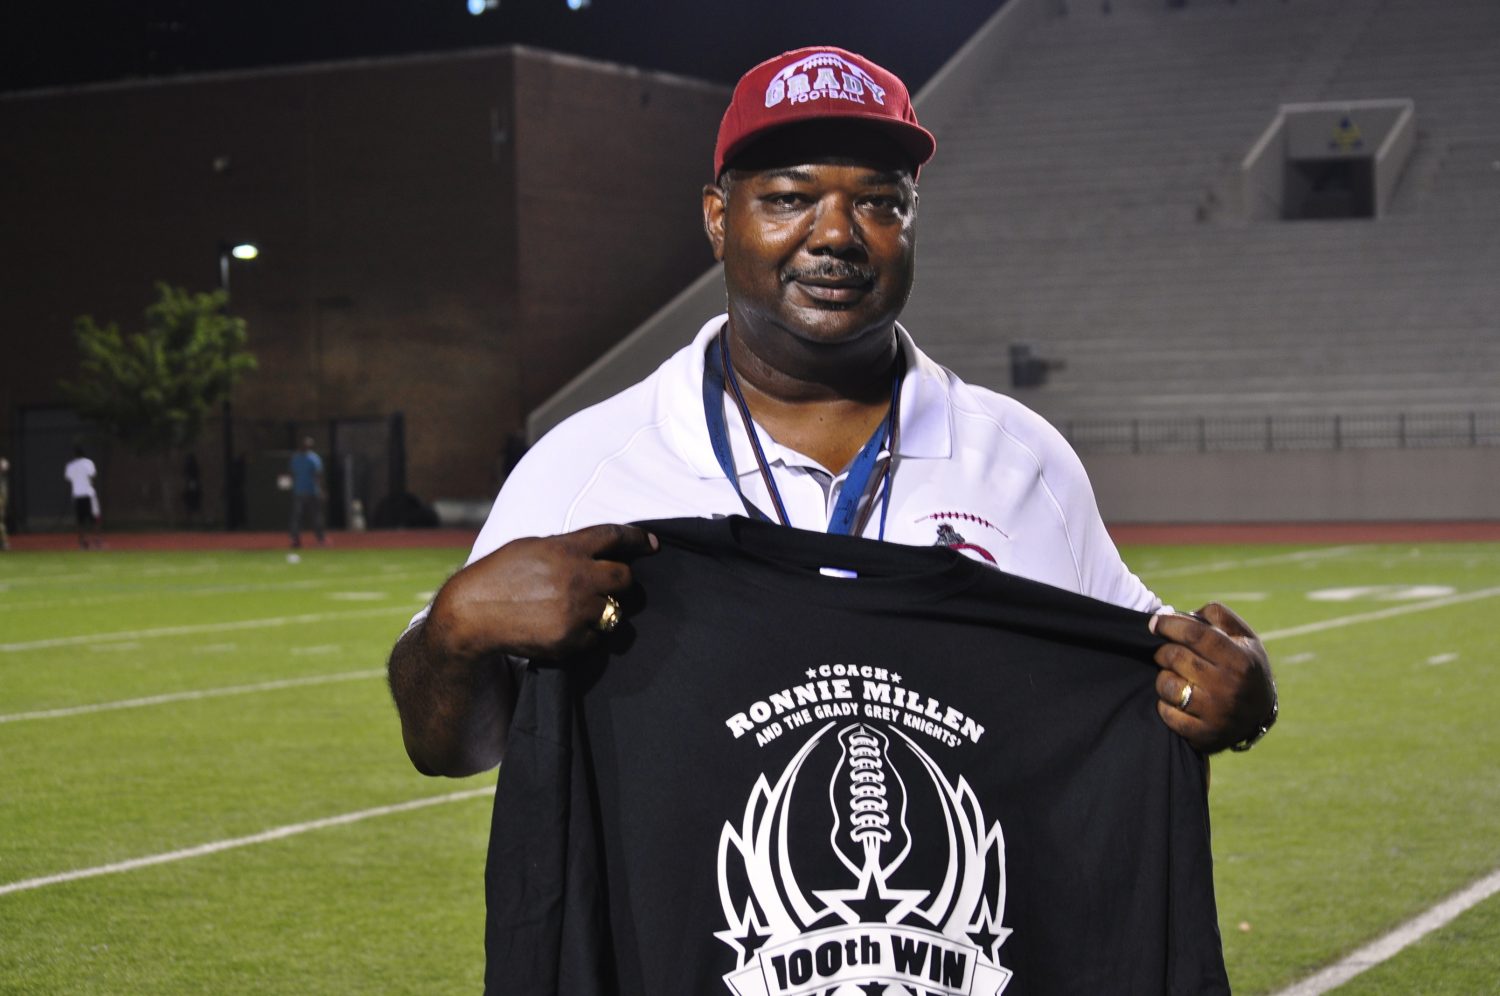 Coach Ronnie Millen poses with his 100th win t-shirt after the game. 